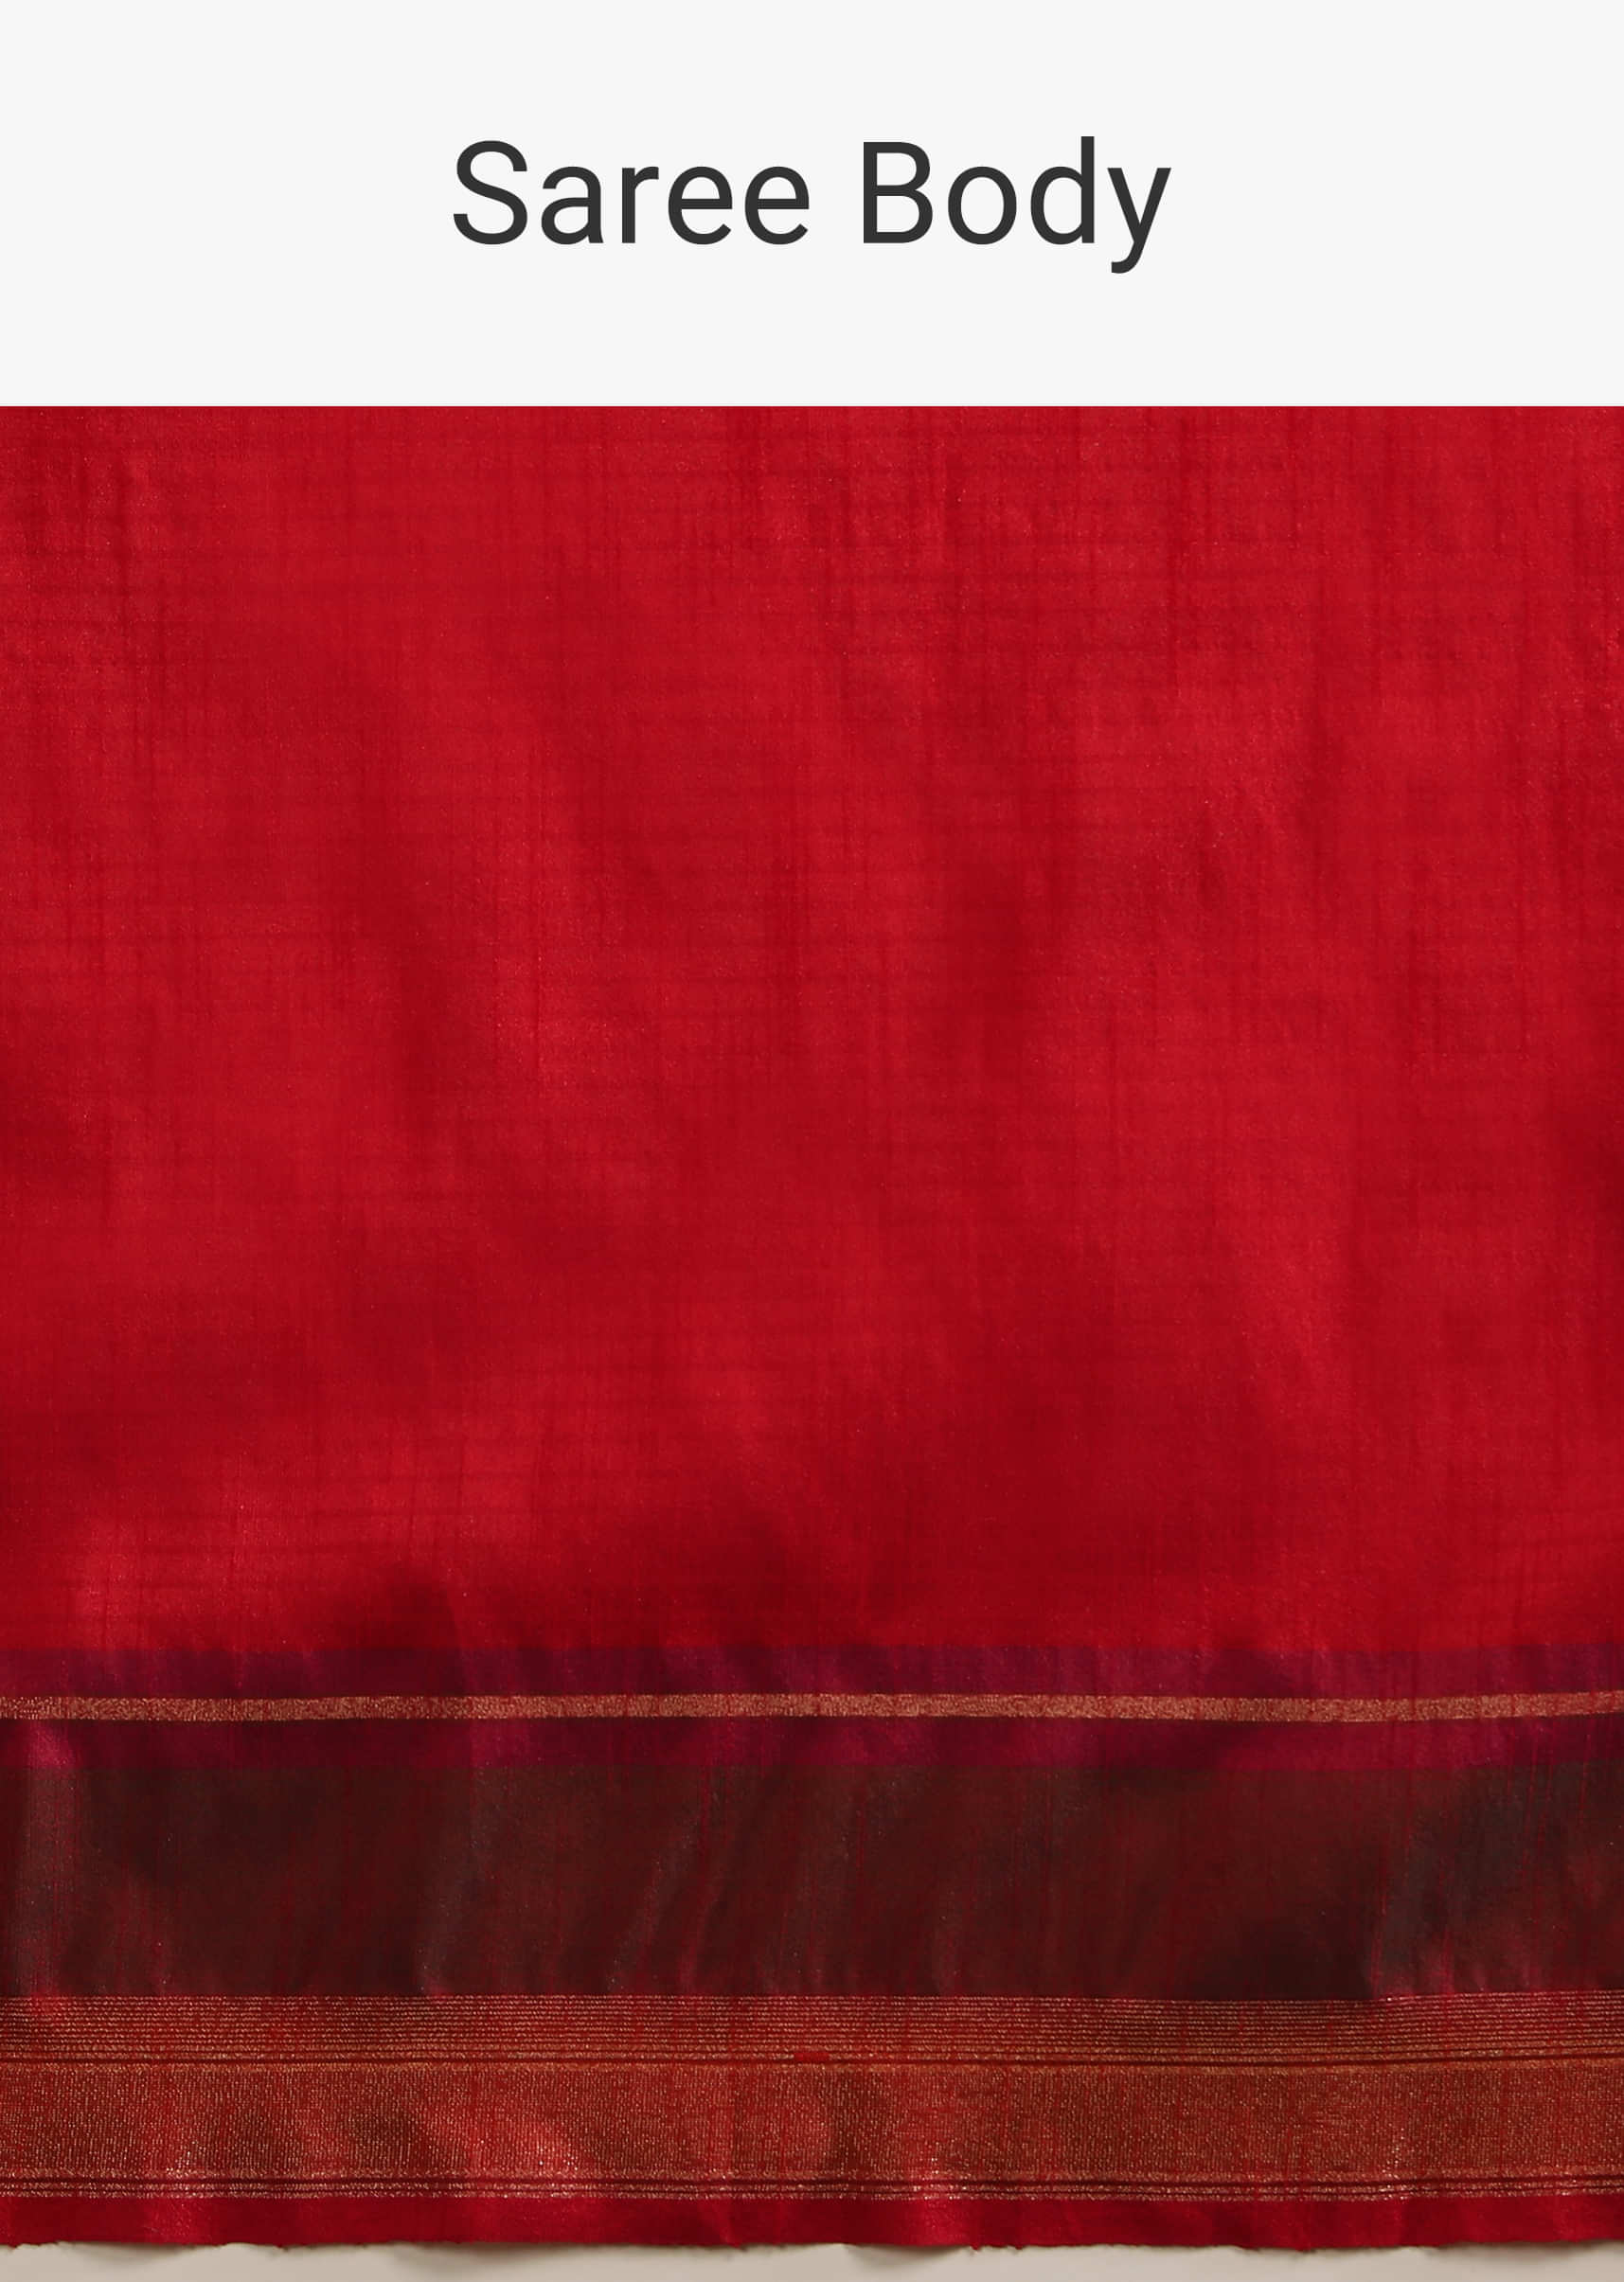 Aurora Red Saree In Tussar Silk With Multi Colored Thread Embroidered Abstract Design On The Pallu  